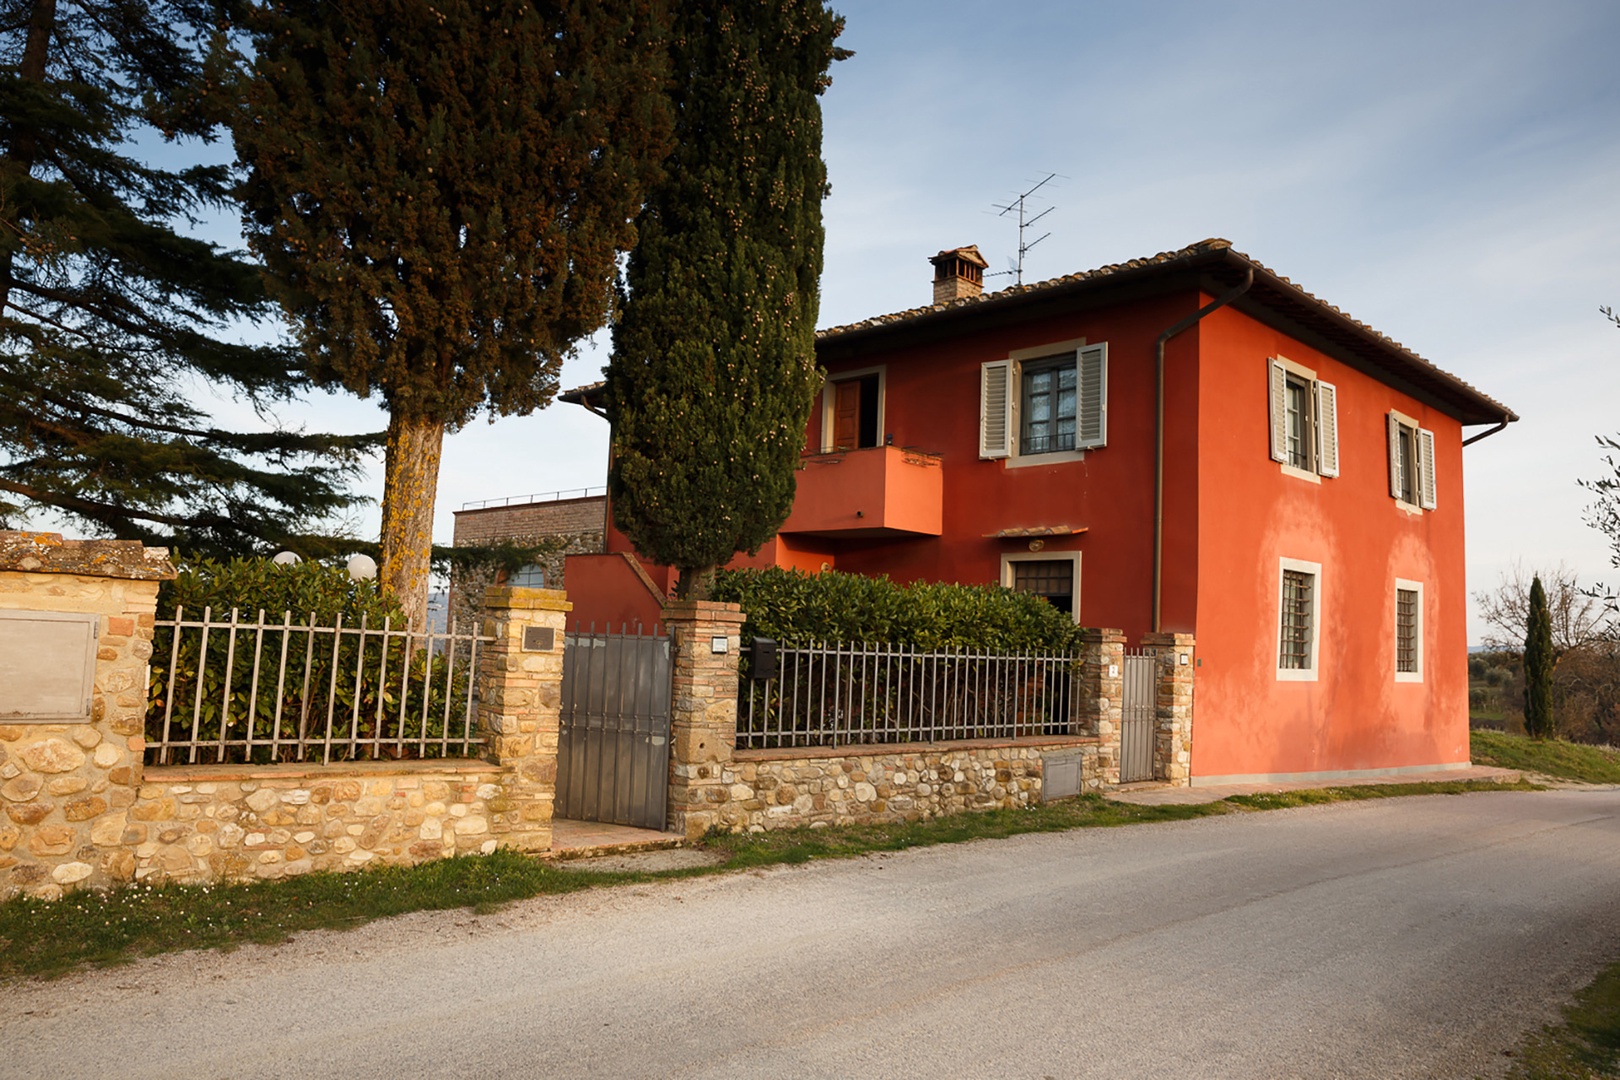 The aptly named Casa Rossa or "Red House" is a restored farmhouse painted in warm red tones.